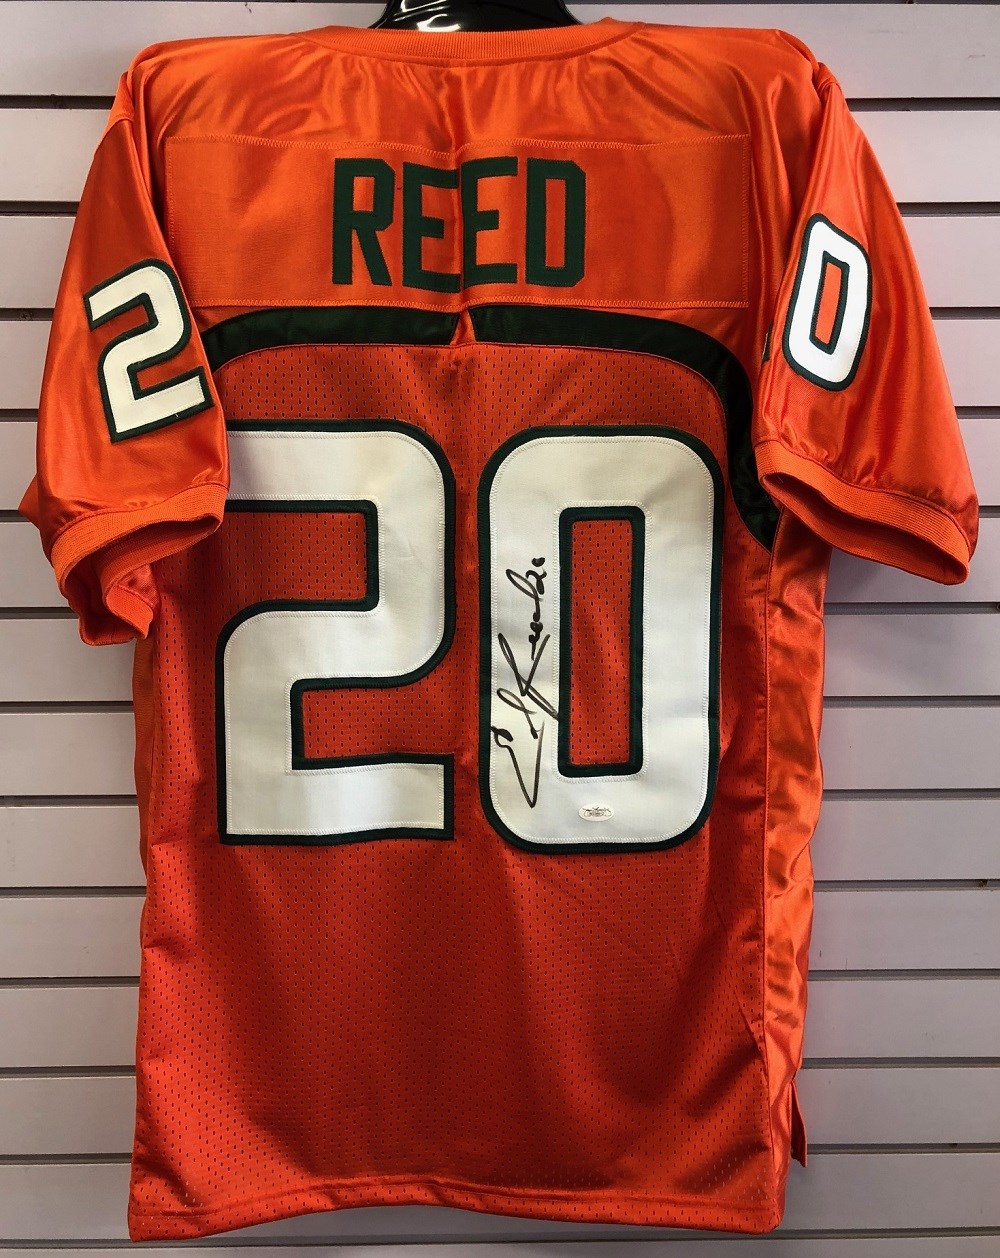 ed reed hurricanes jersey